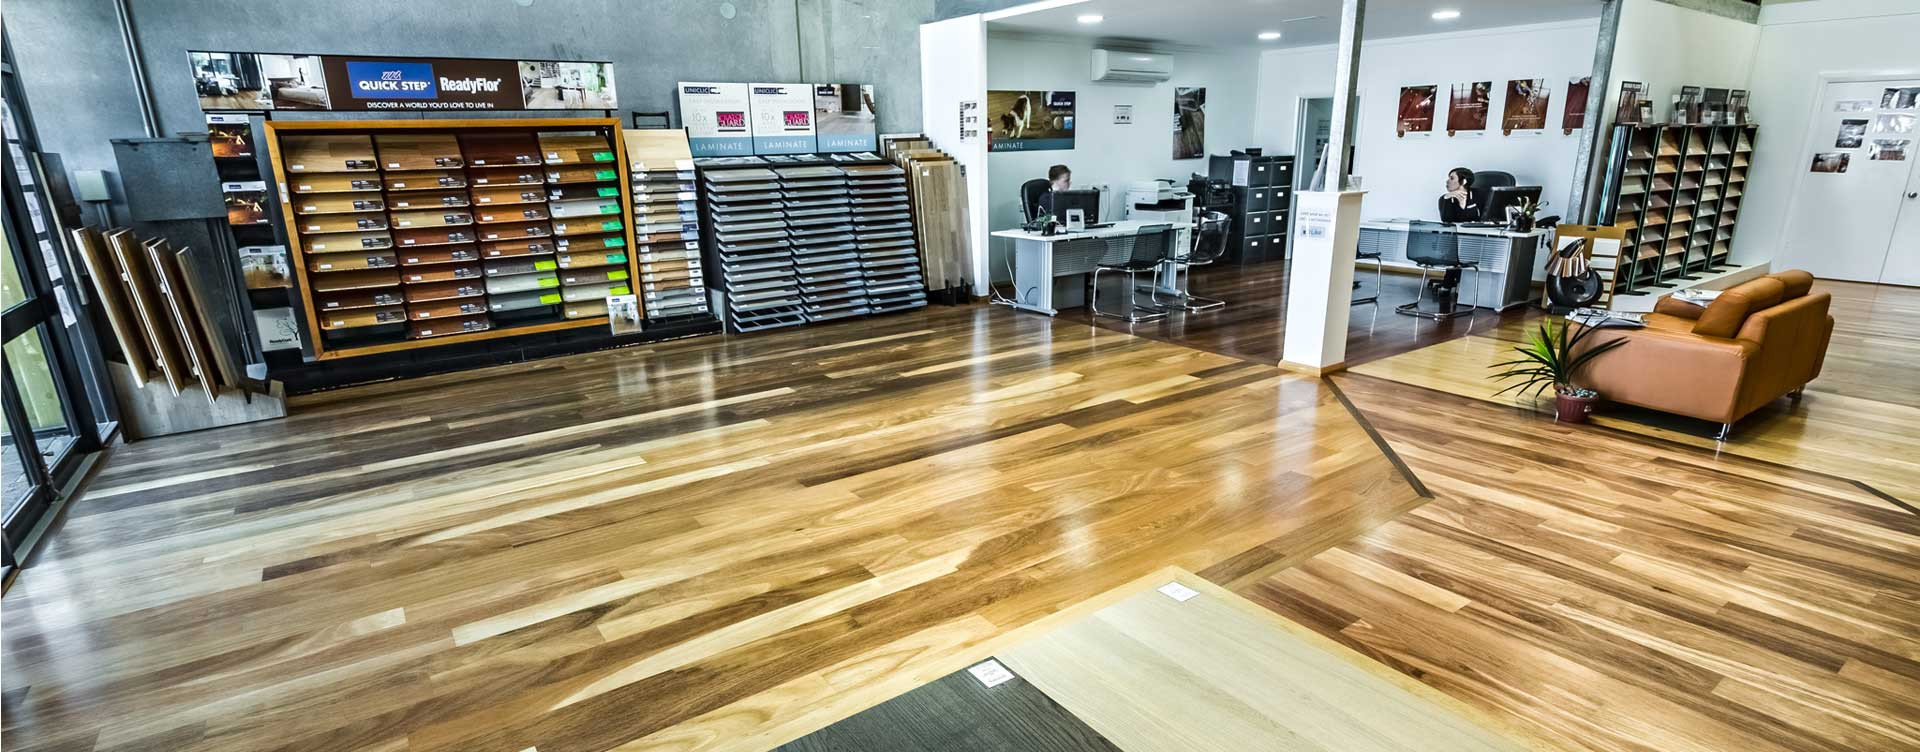 20 Great Can You Install solid Hardwood Floors On Concrete 2024 free download can you install solid hardwood floors on concrete of timber flooring perth coastal flooring wa quality wooden regarding thats why they call us the home of fine wood floors